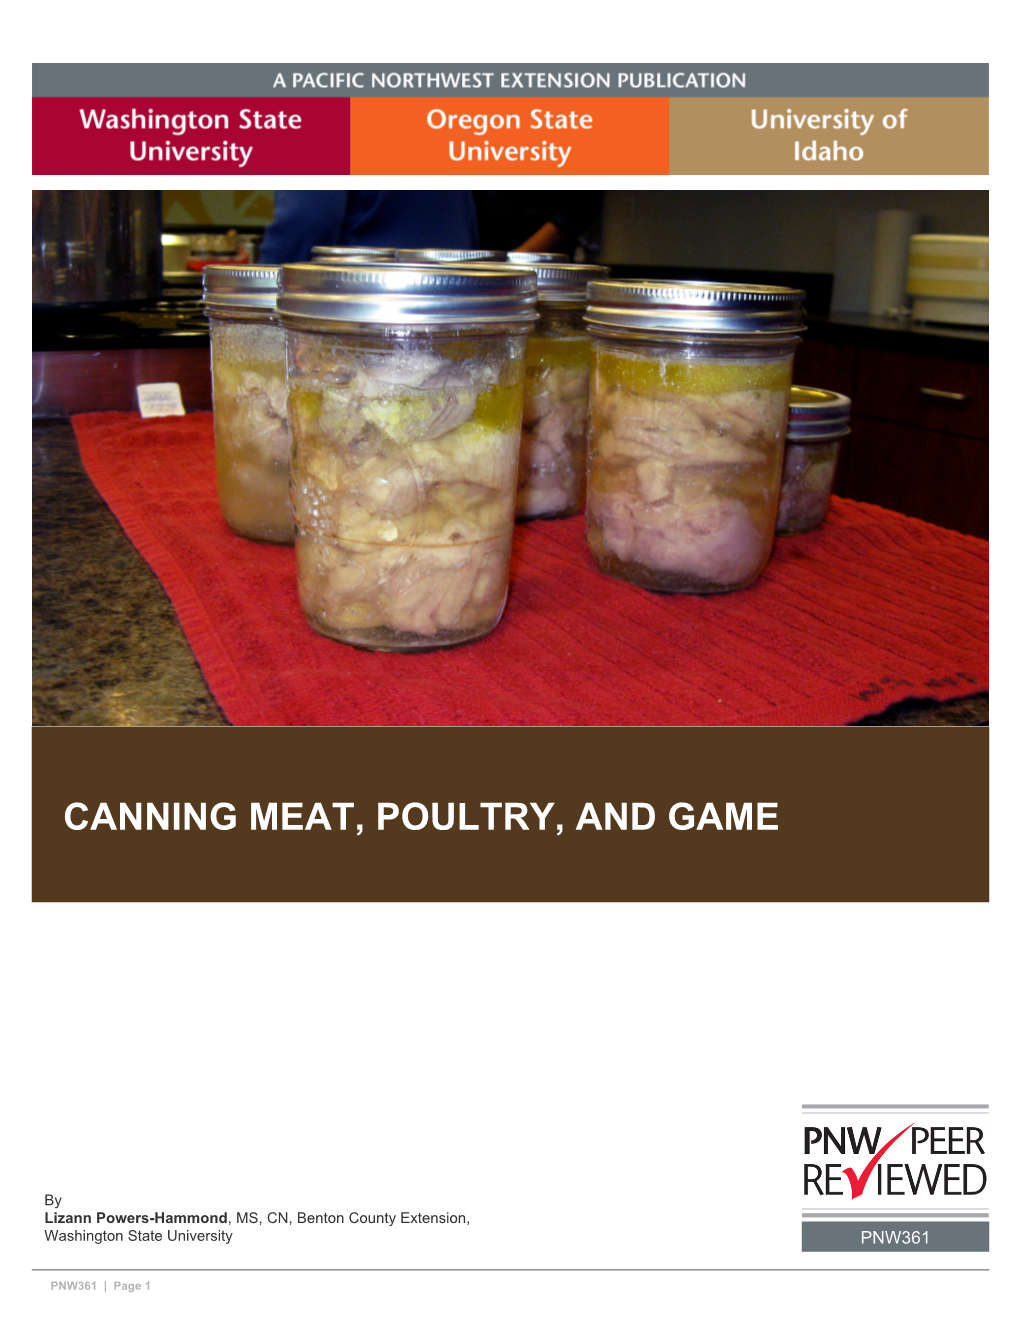 Canning Meat, Poultry, and Game